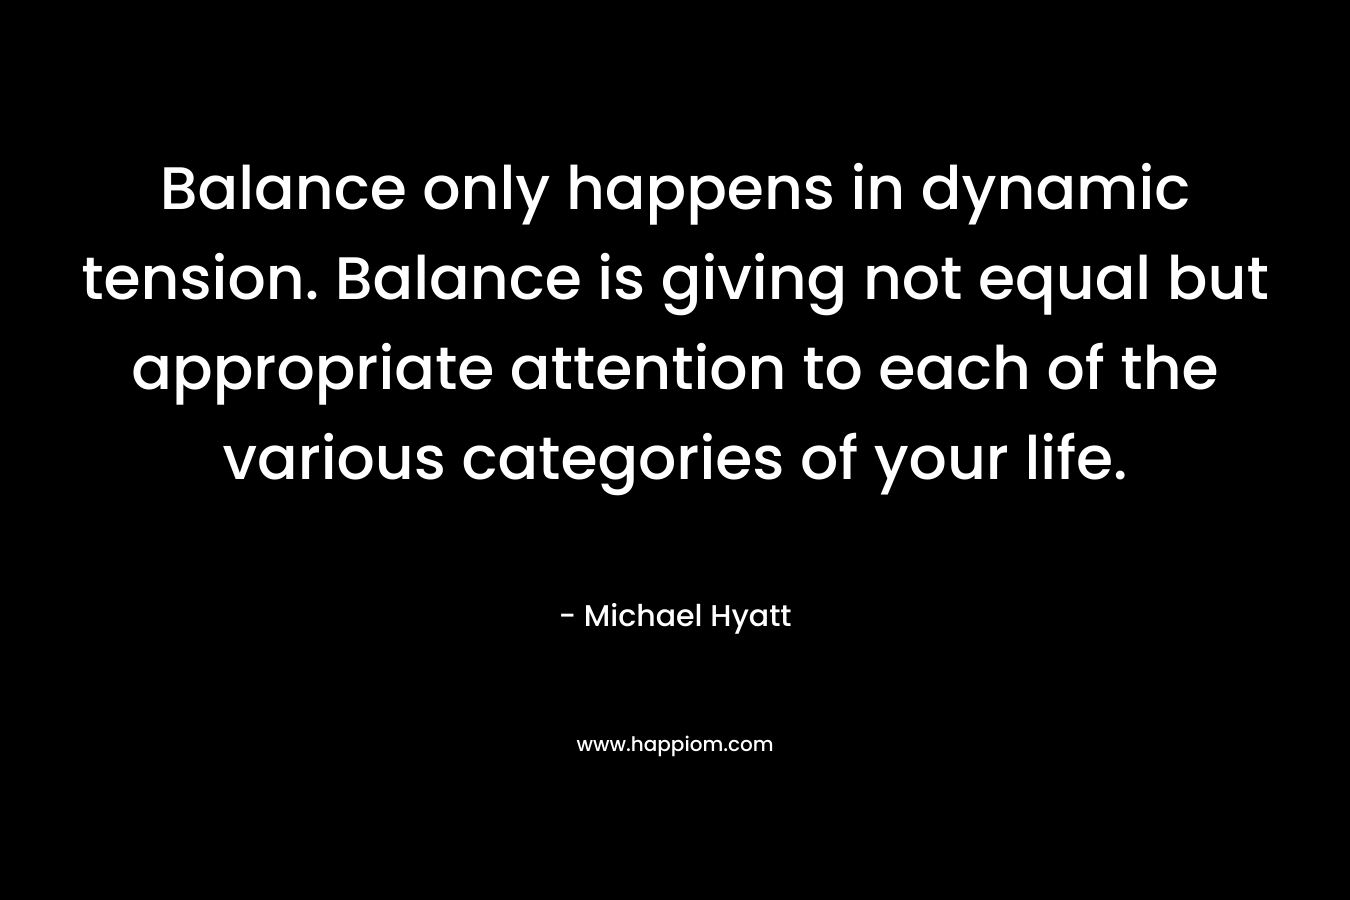 Balance only happens in dynamic tension. Balance is giving not equal but appropriate attention to each of the various categories of your life.